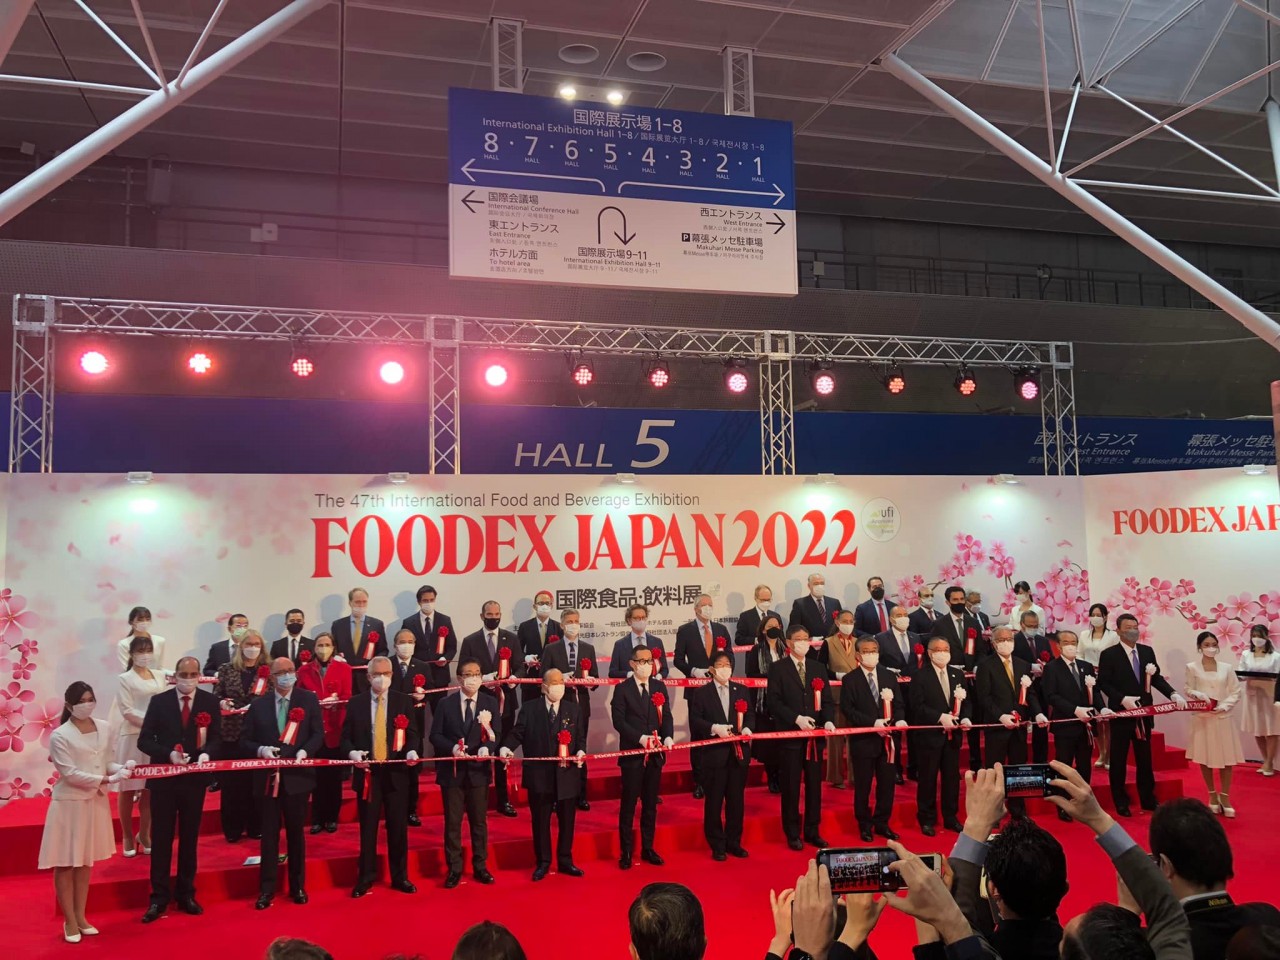 Vietnamese agricultural products impress at international exhibitions in Japan All Vietnamese agricultural products and foods displayed at the exhibition meet Japan's strict food safety and hygiene standards and are officially imported.